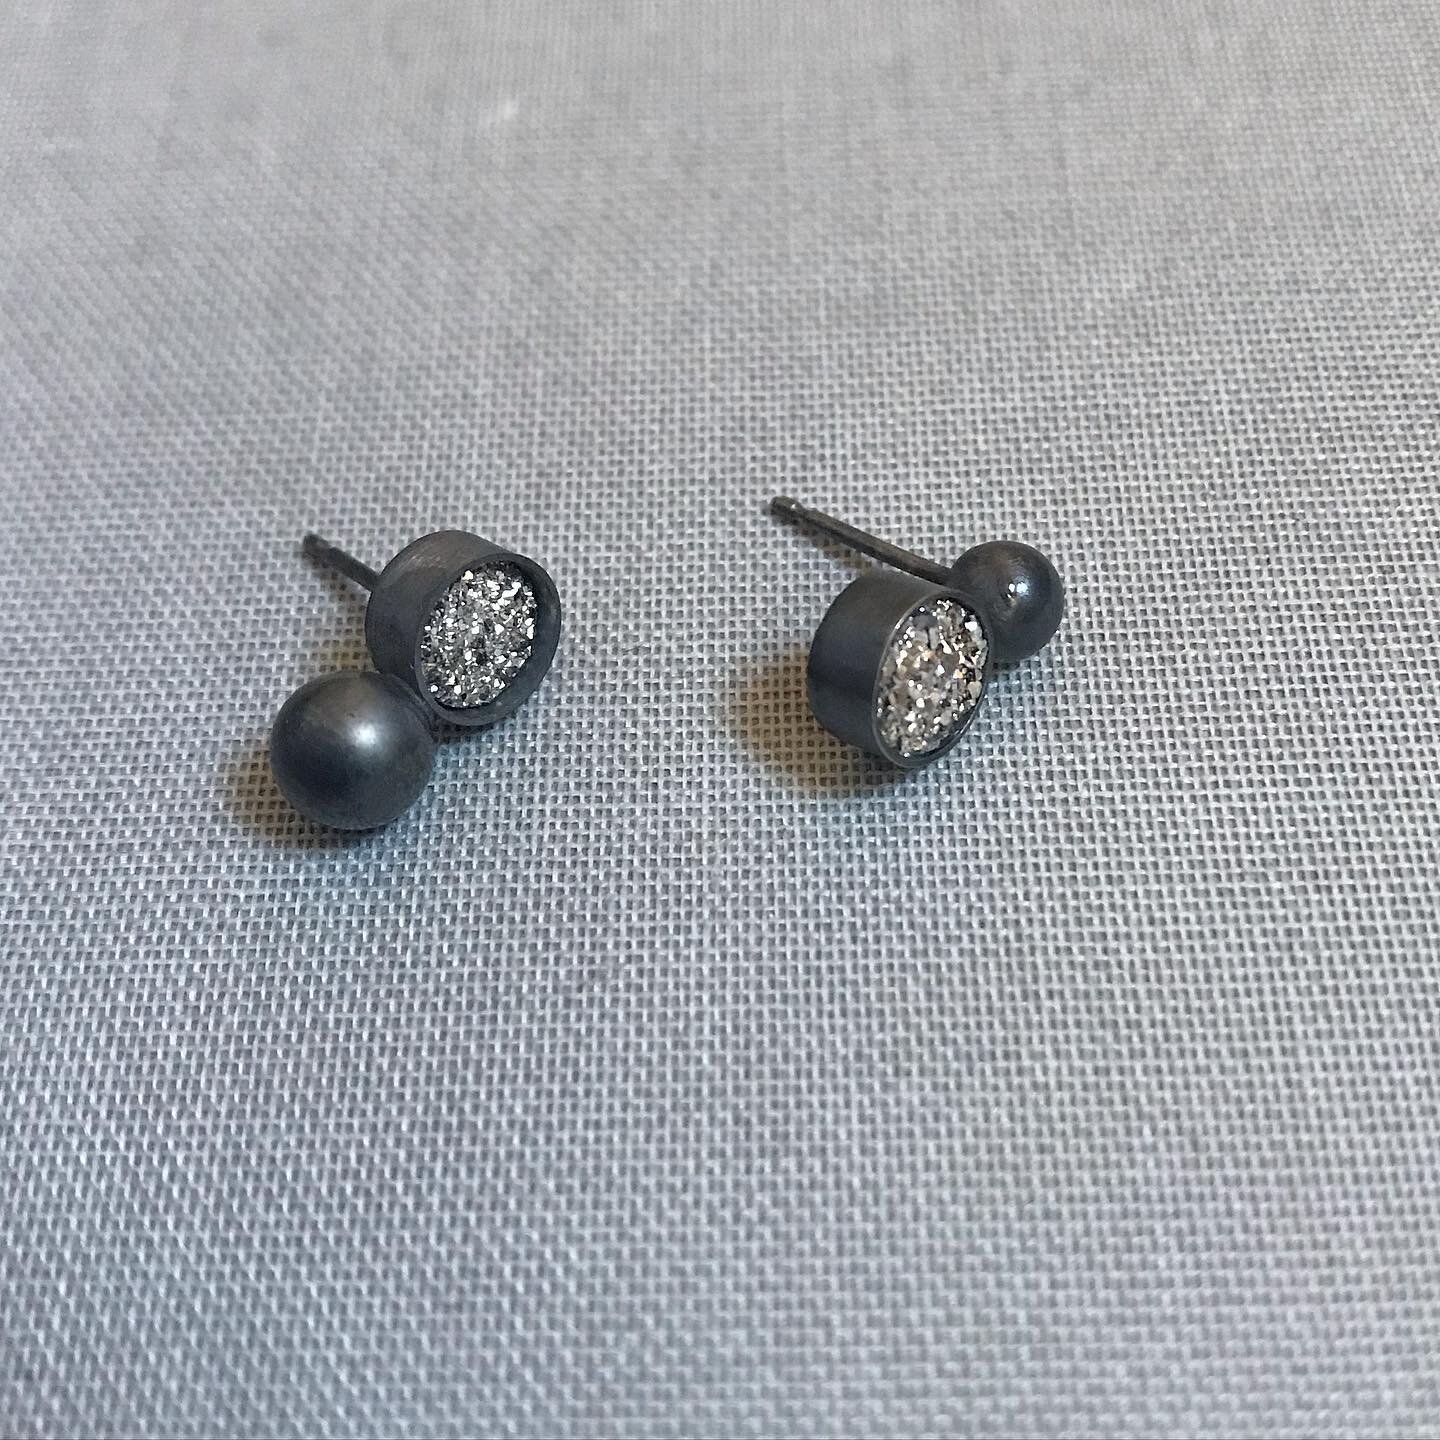 Getting smaller! Thinking about pairs. Mix and match singles or paired similar pieces together? 
#30dayearringchallenge #30daydesignchallenge #earrings #studearrings #oxidisedjewellery #druzy #black #silver #bauhaus #wearableart